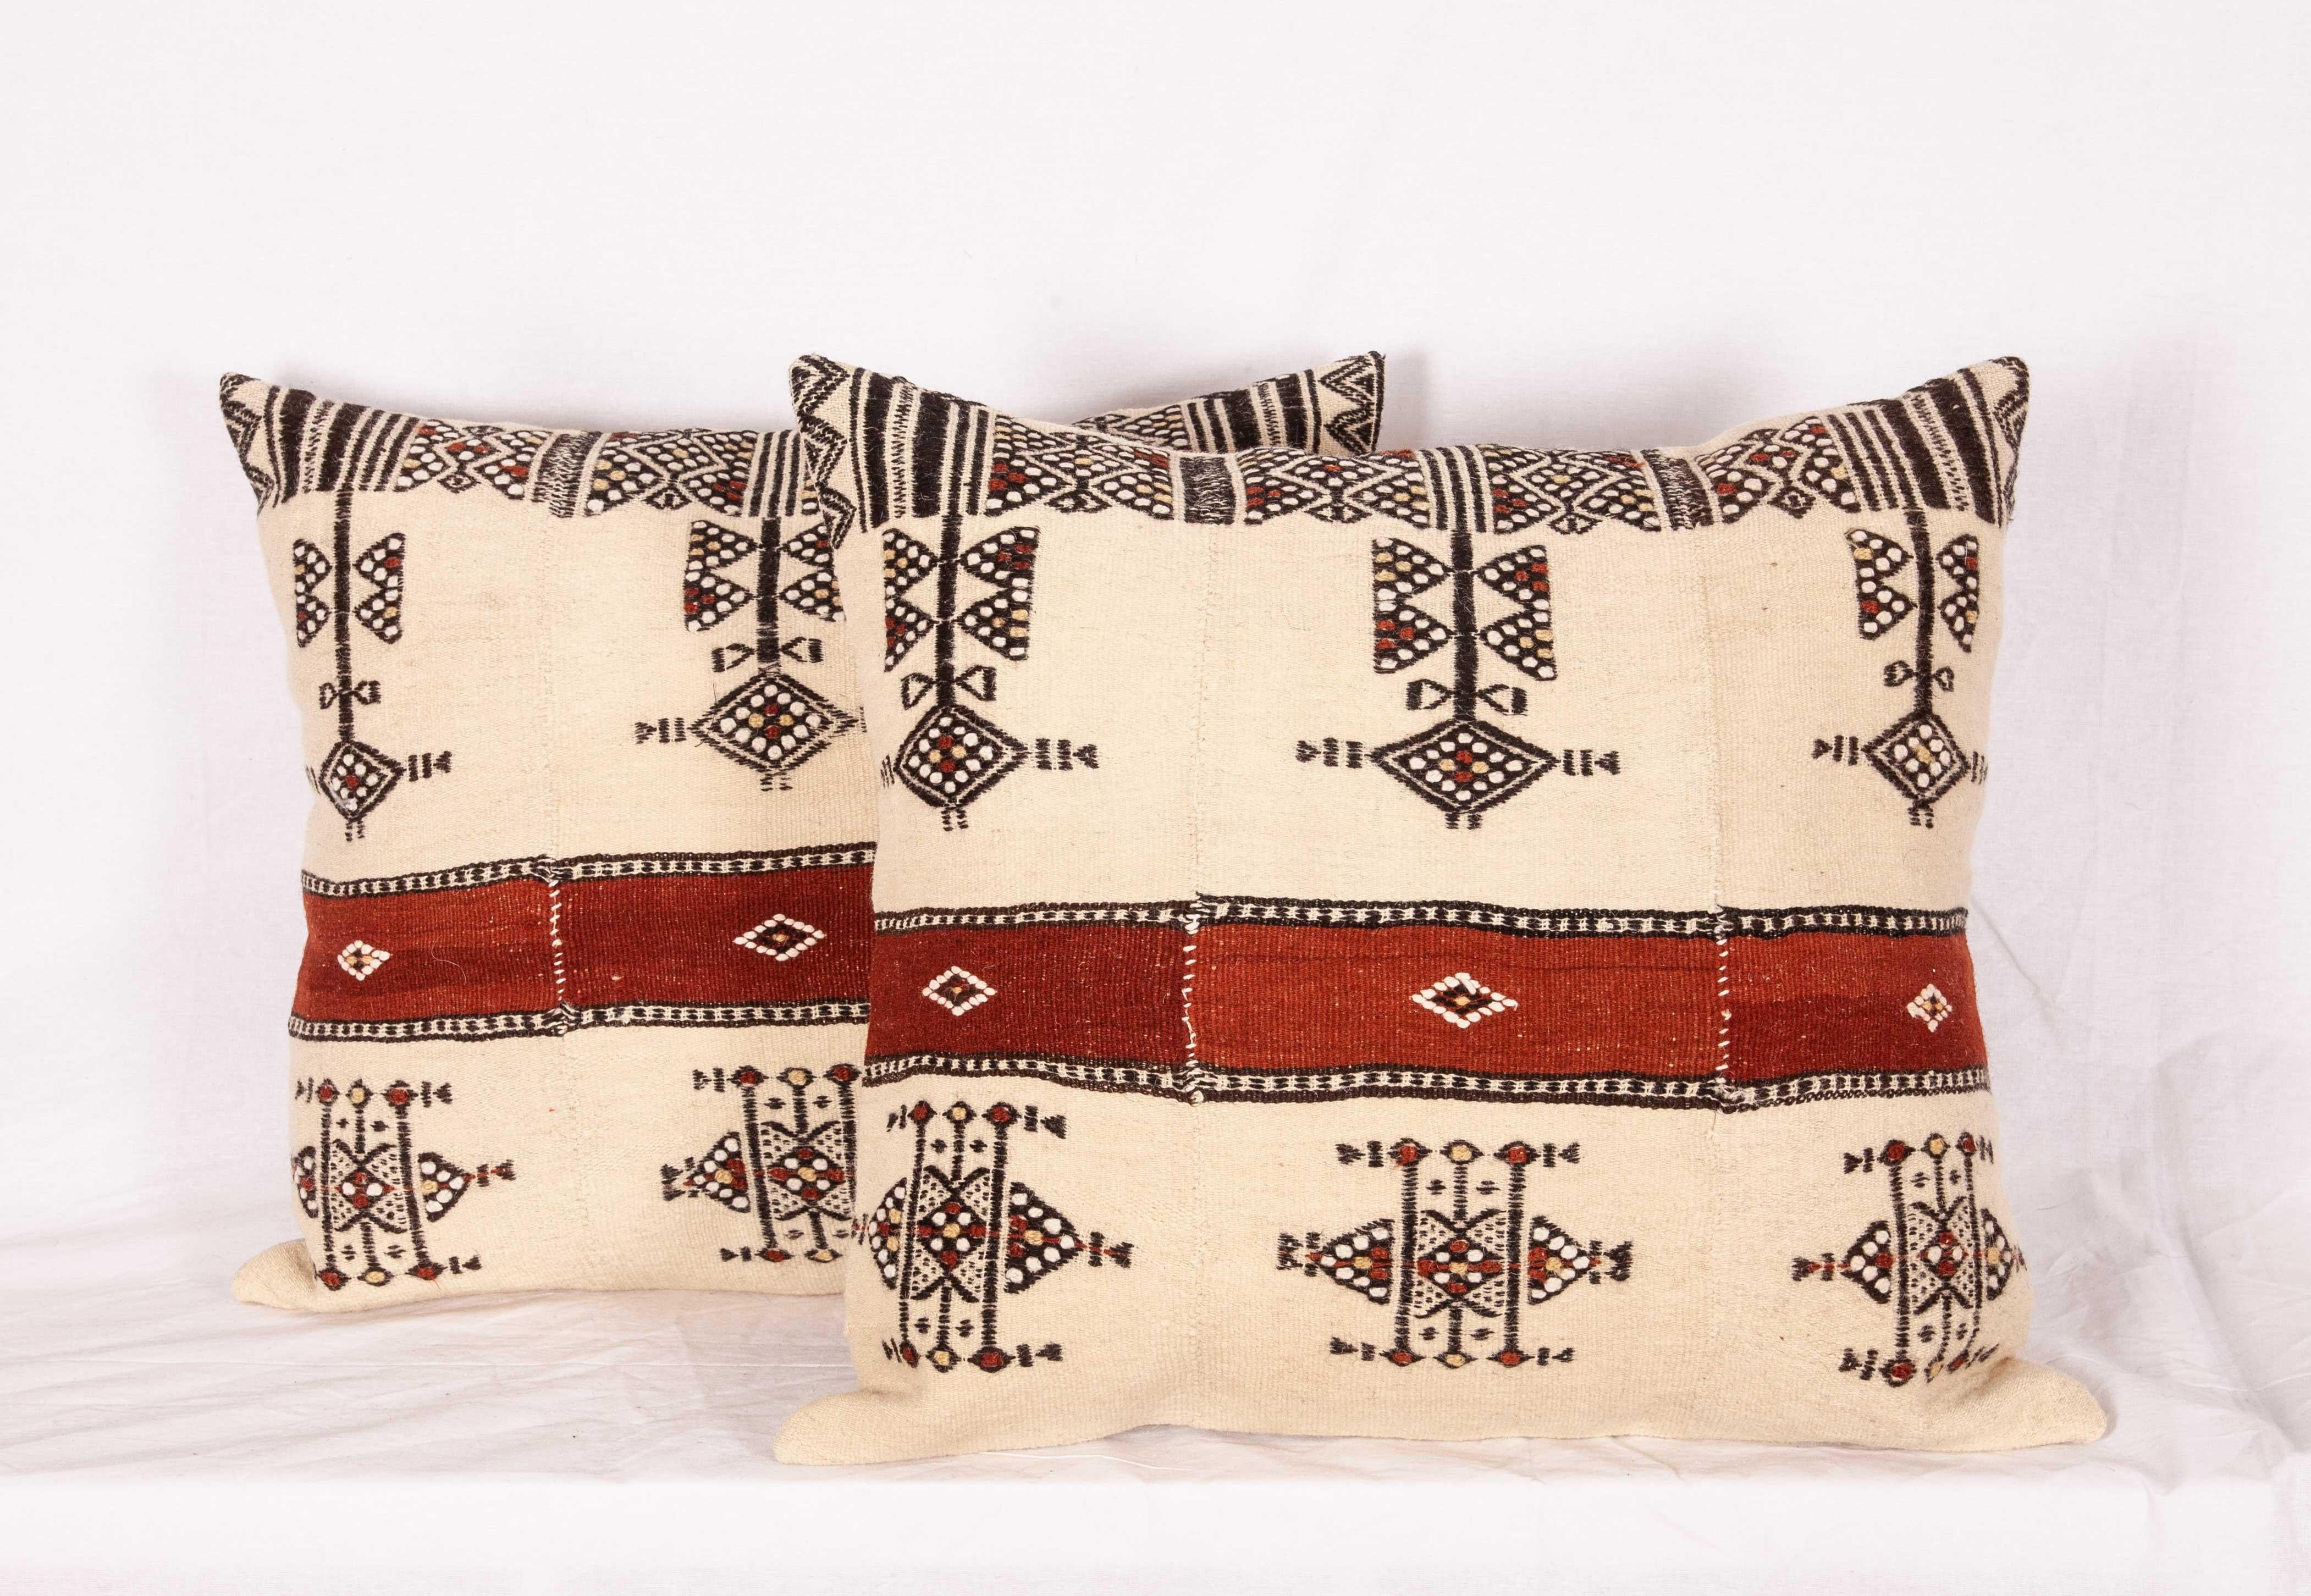 Hand-Woven Fulani Pillow Covers from Mali Africa Mid-20th Century